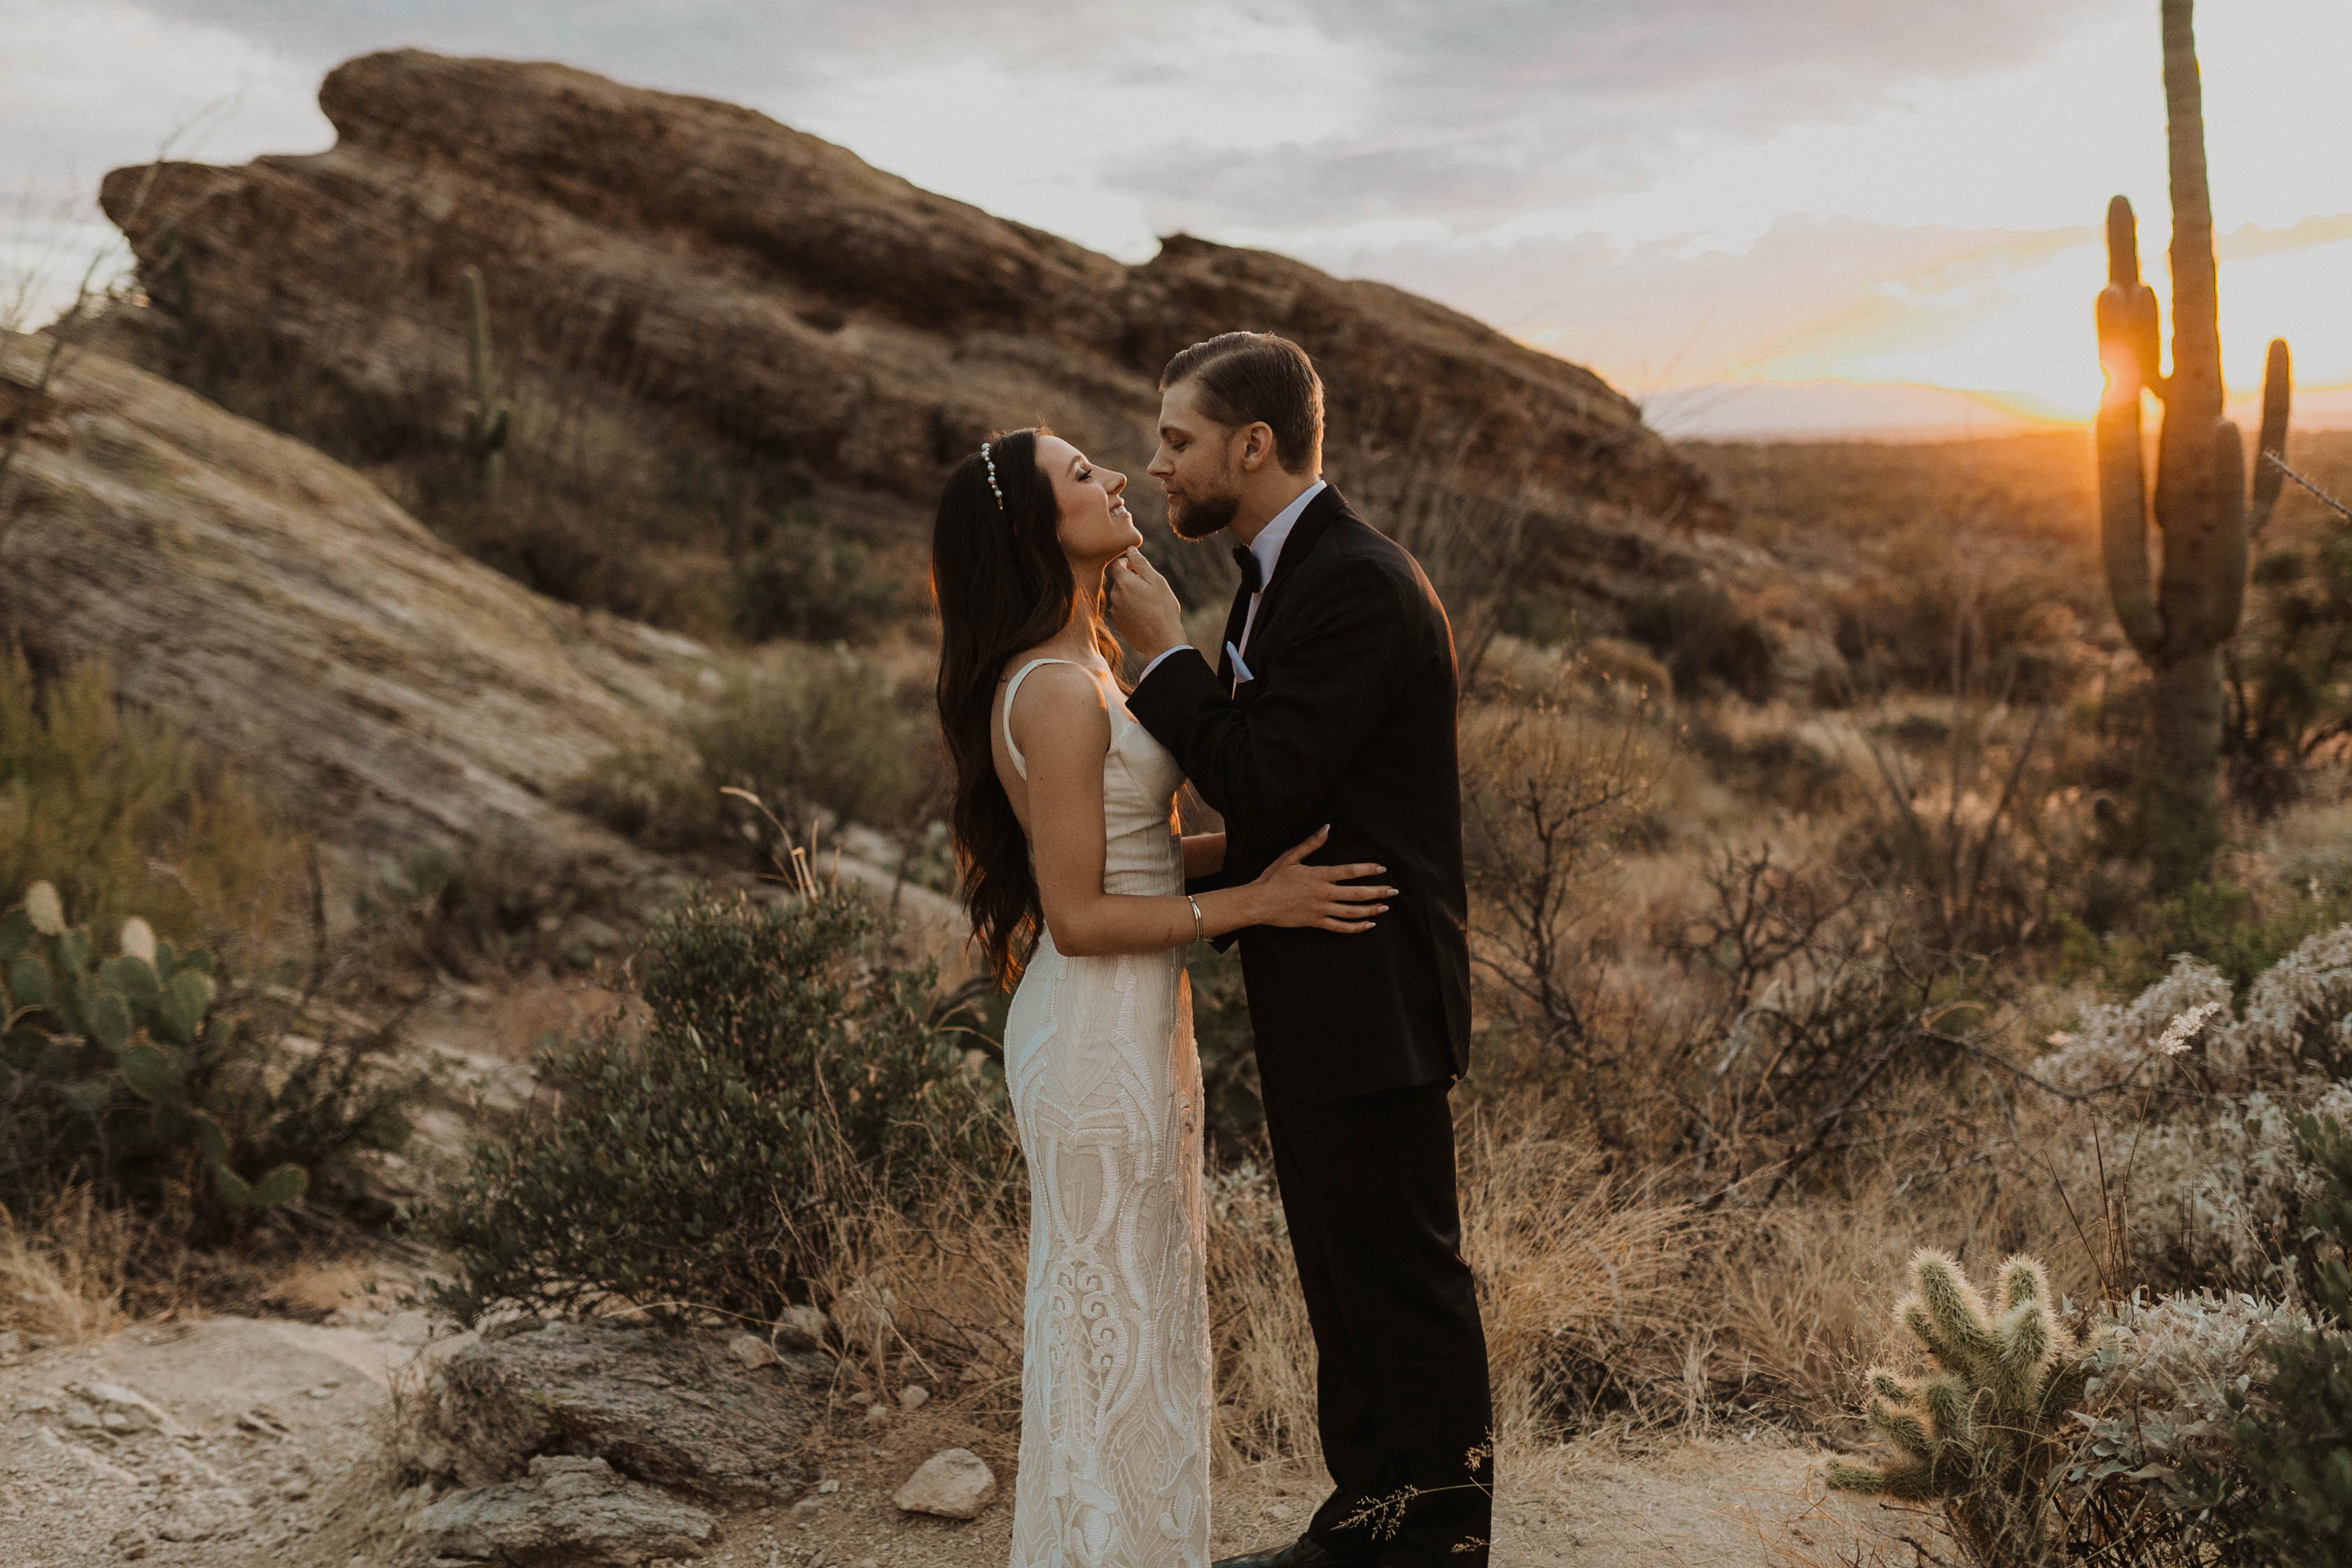 Bride and groom look at each other as the sun sets behind them in the Arizona desert.